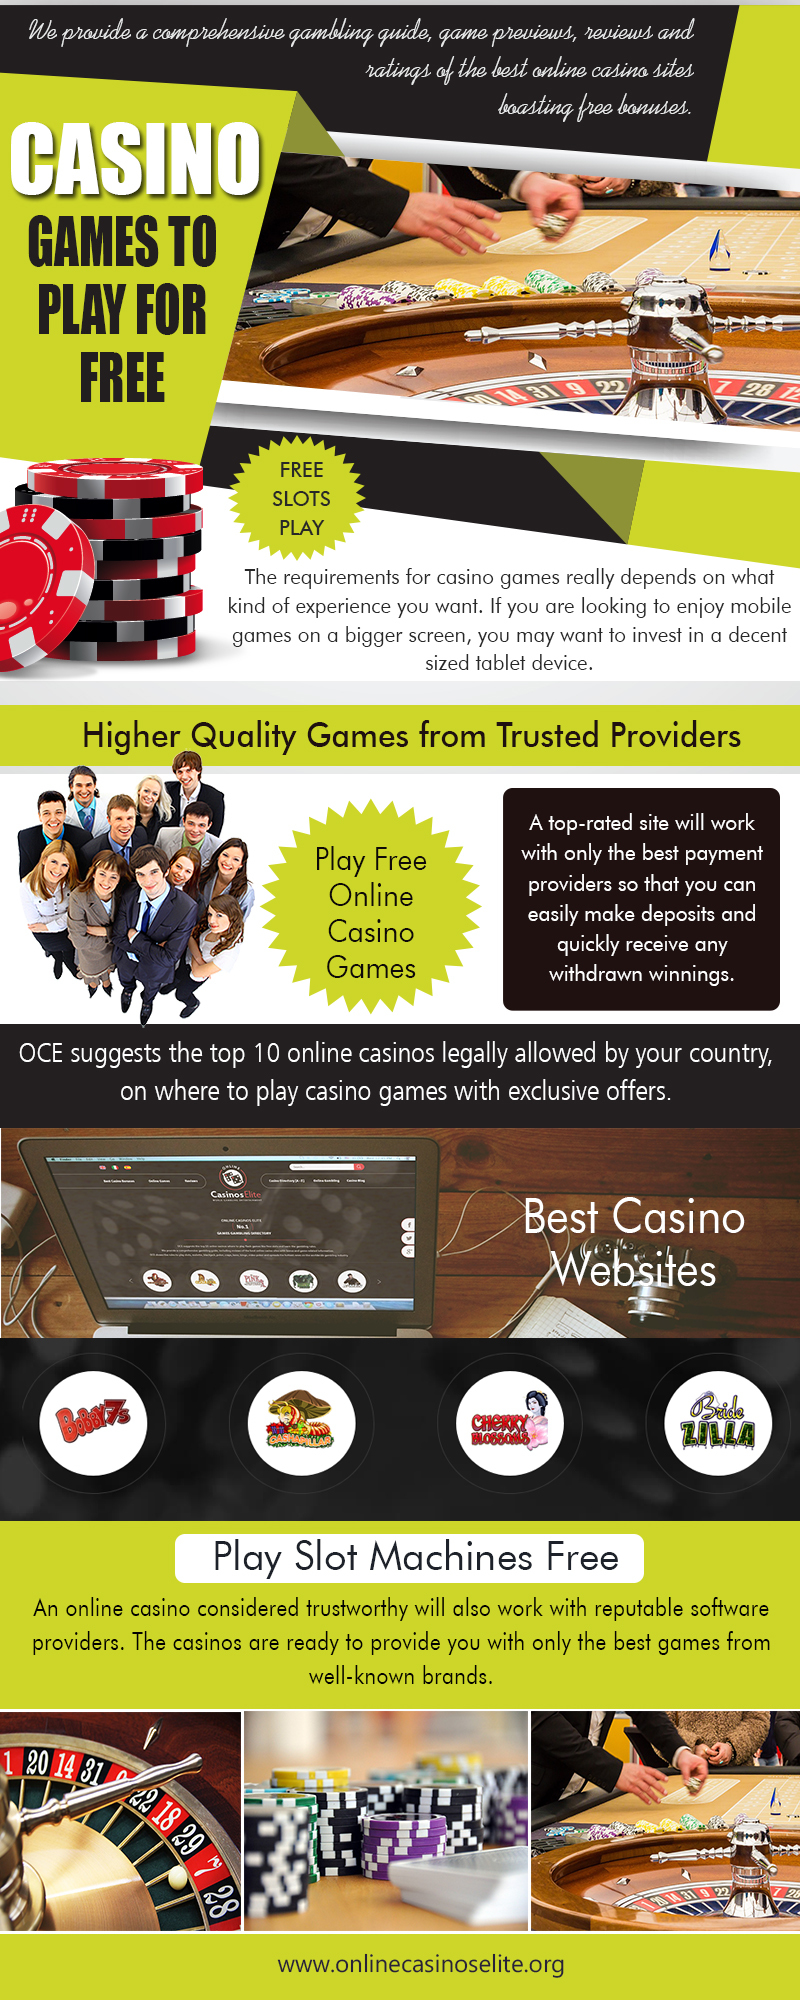 Casino Games to Play for Free | onlinecasinoselite.org